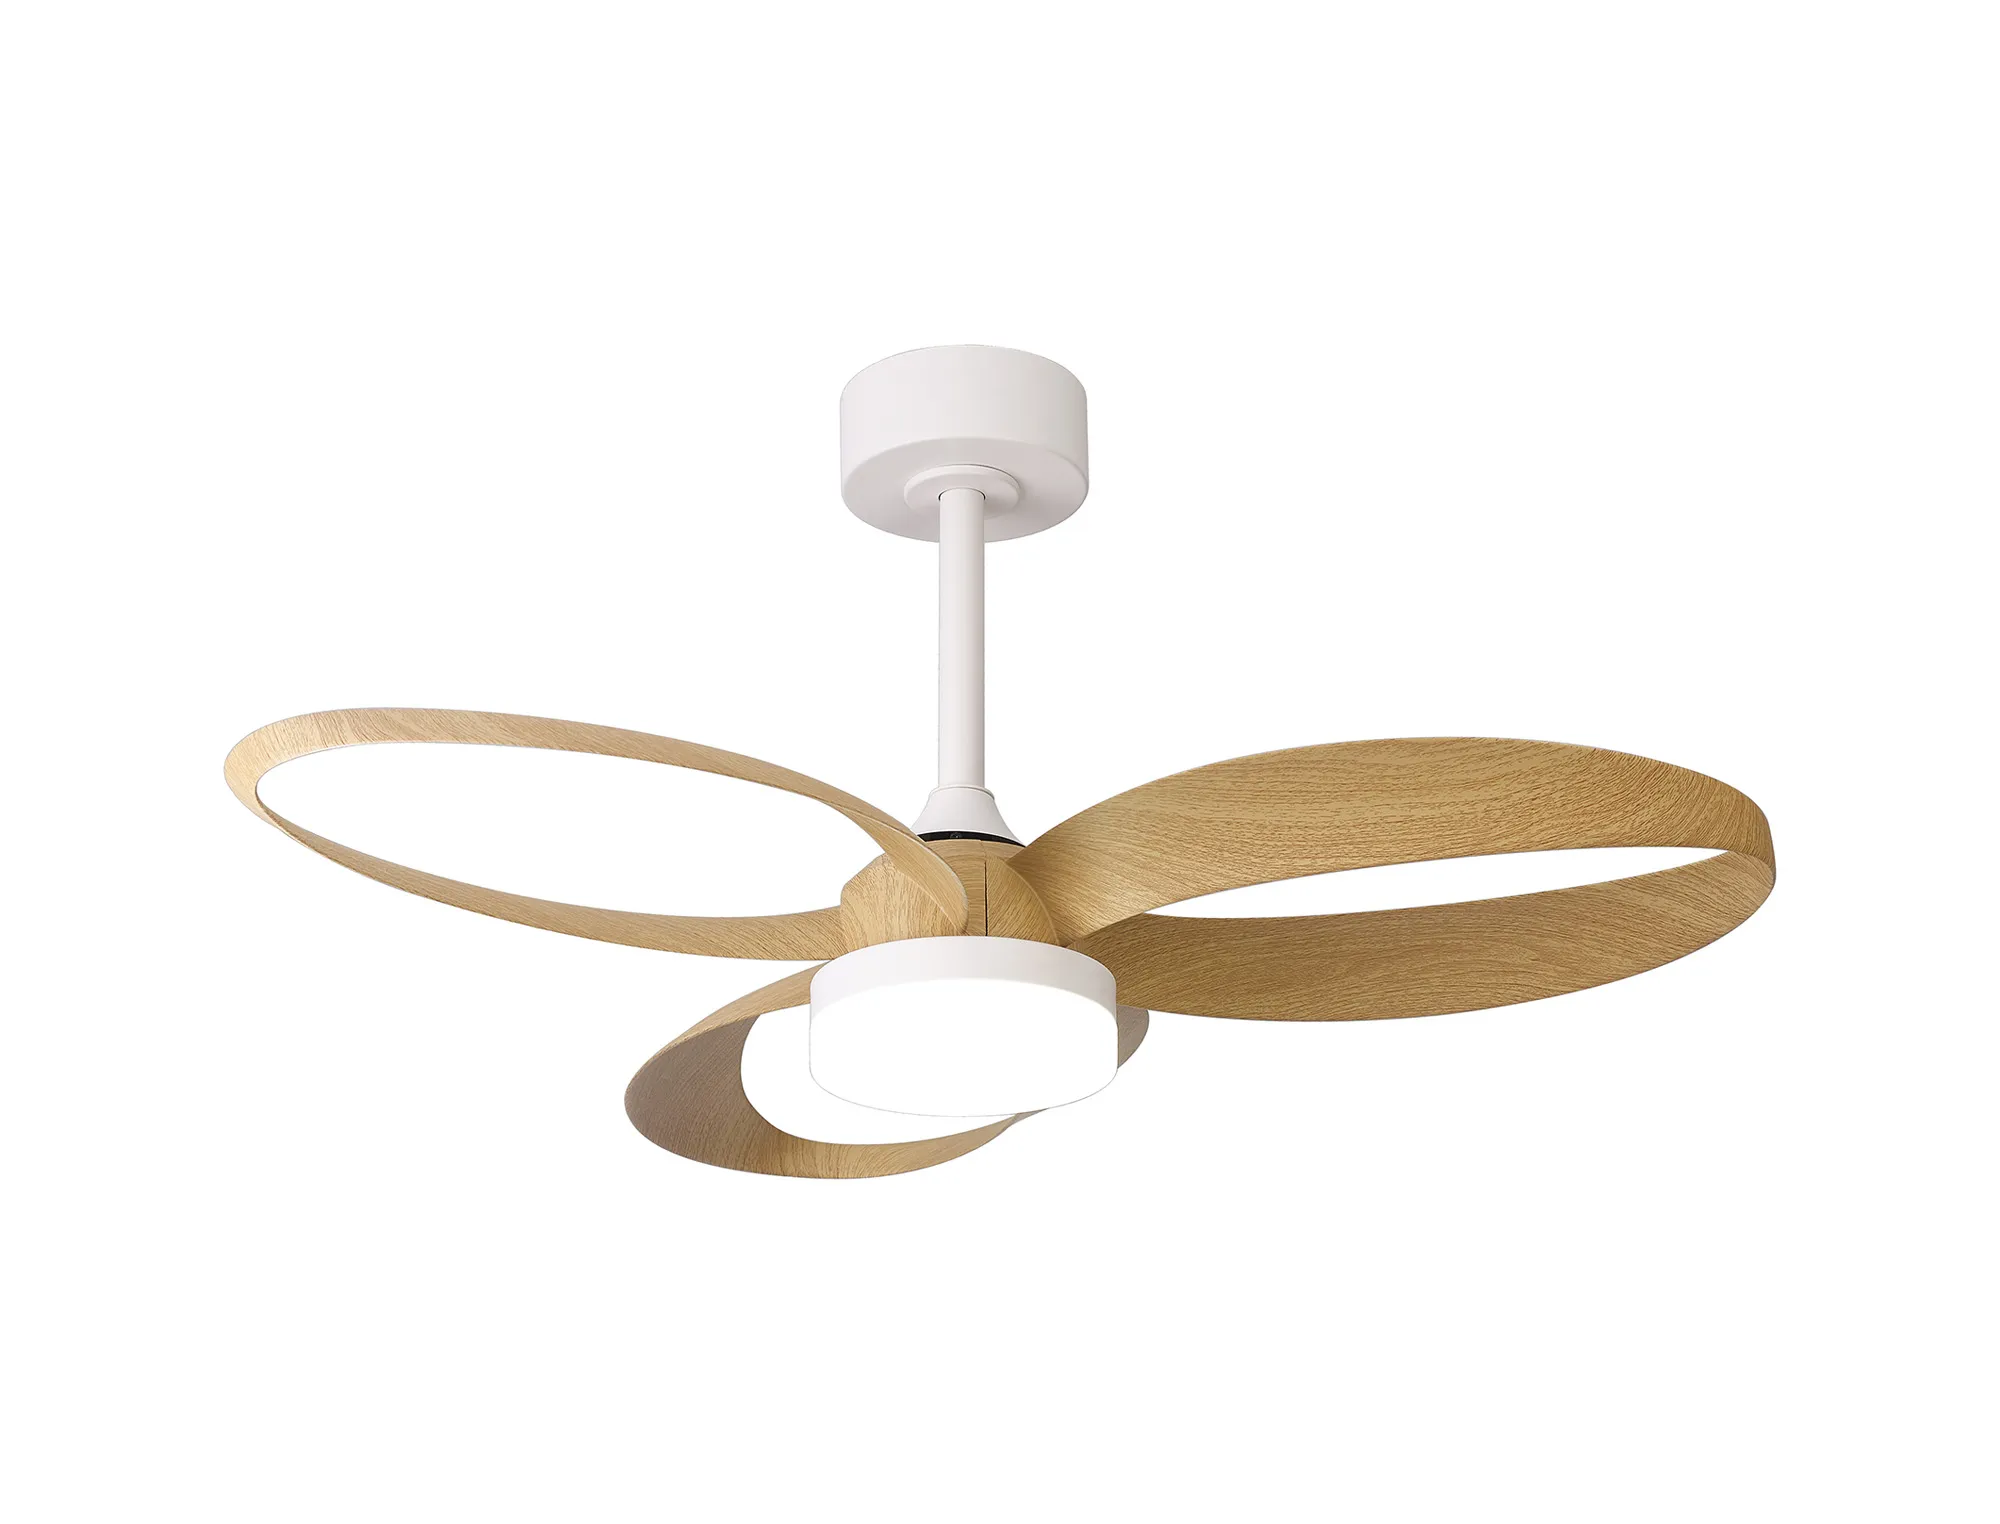 Infinity Fan Heating, Cooling & Ventilation Mantra Ceiling Fans